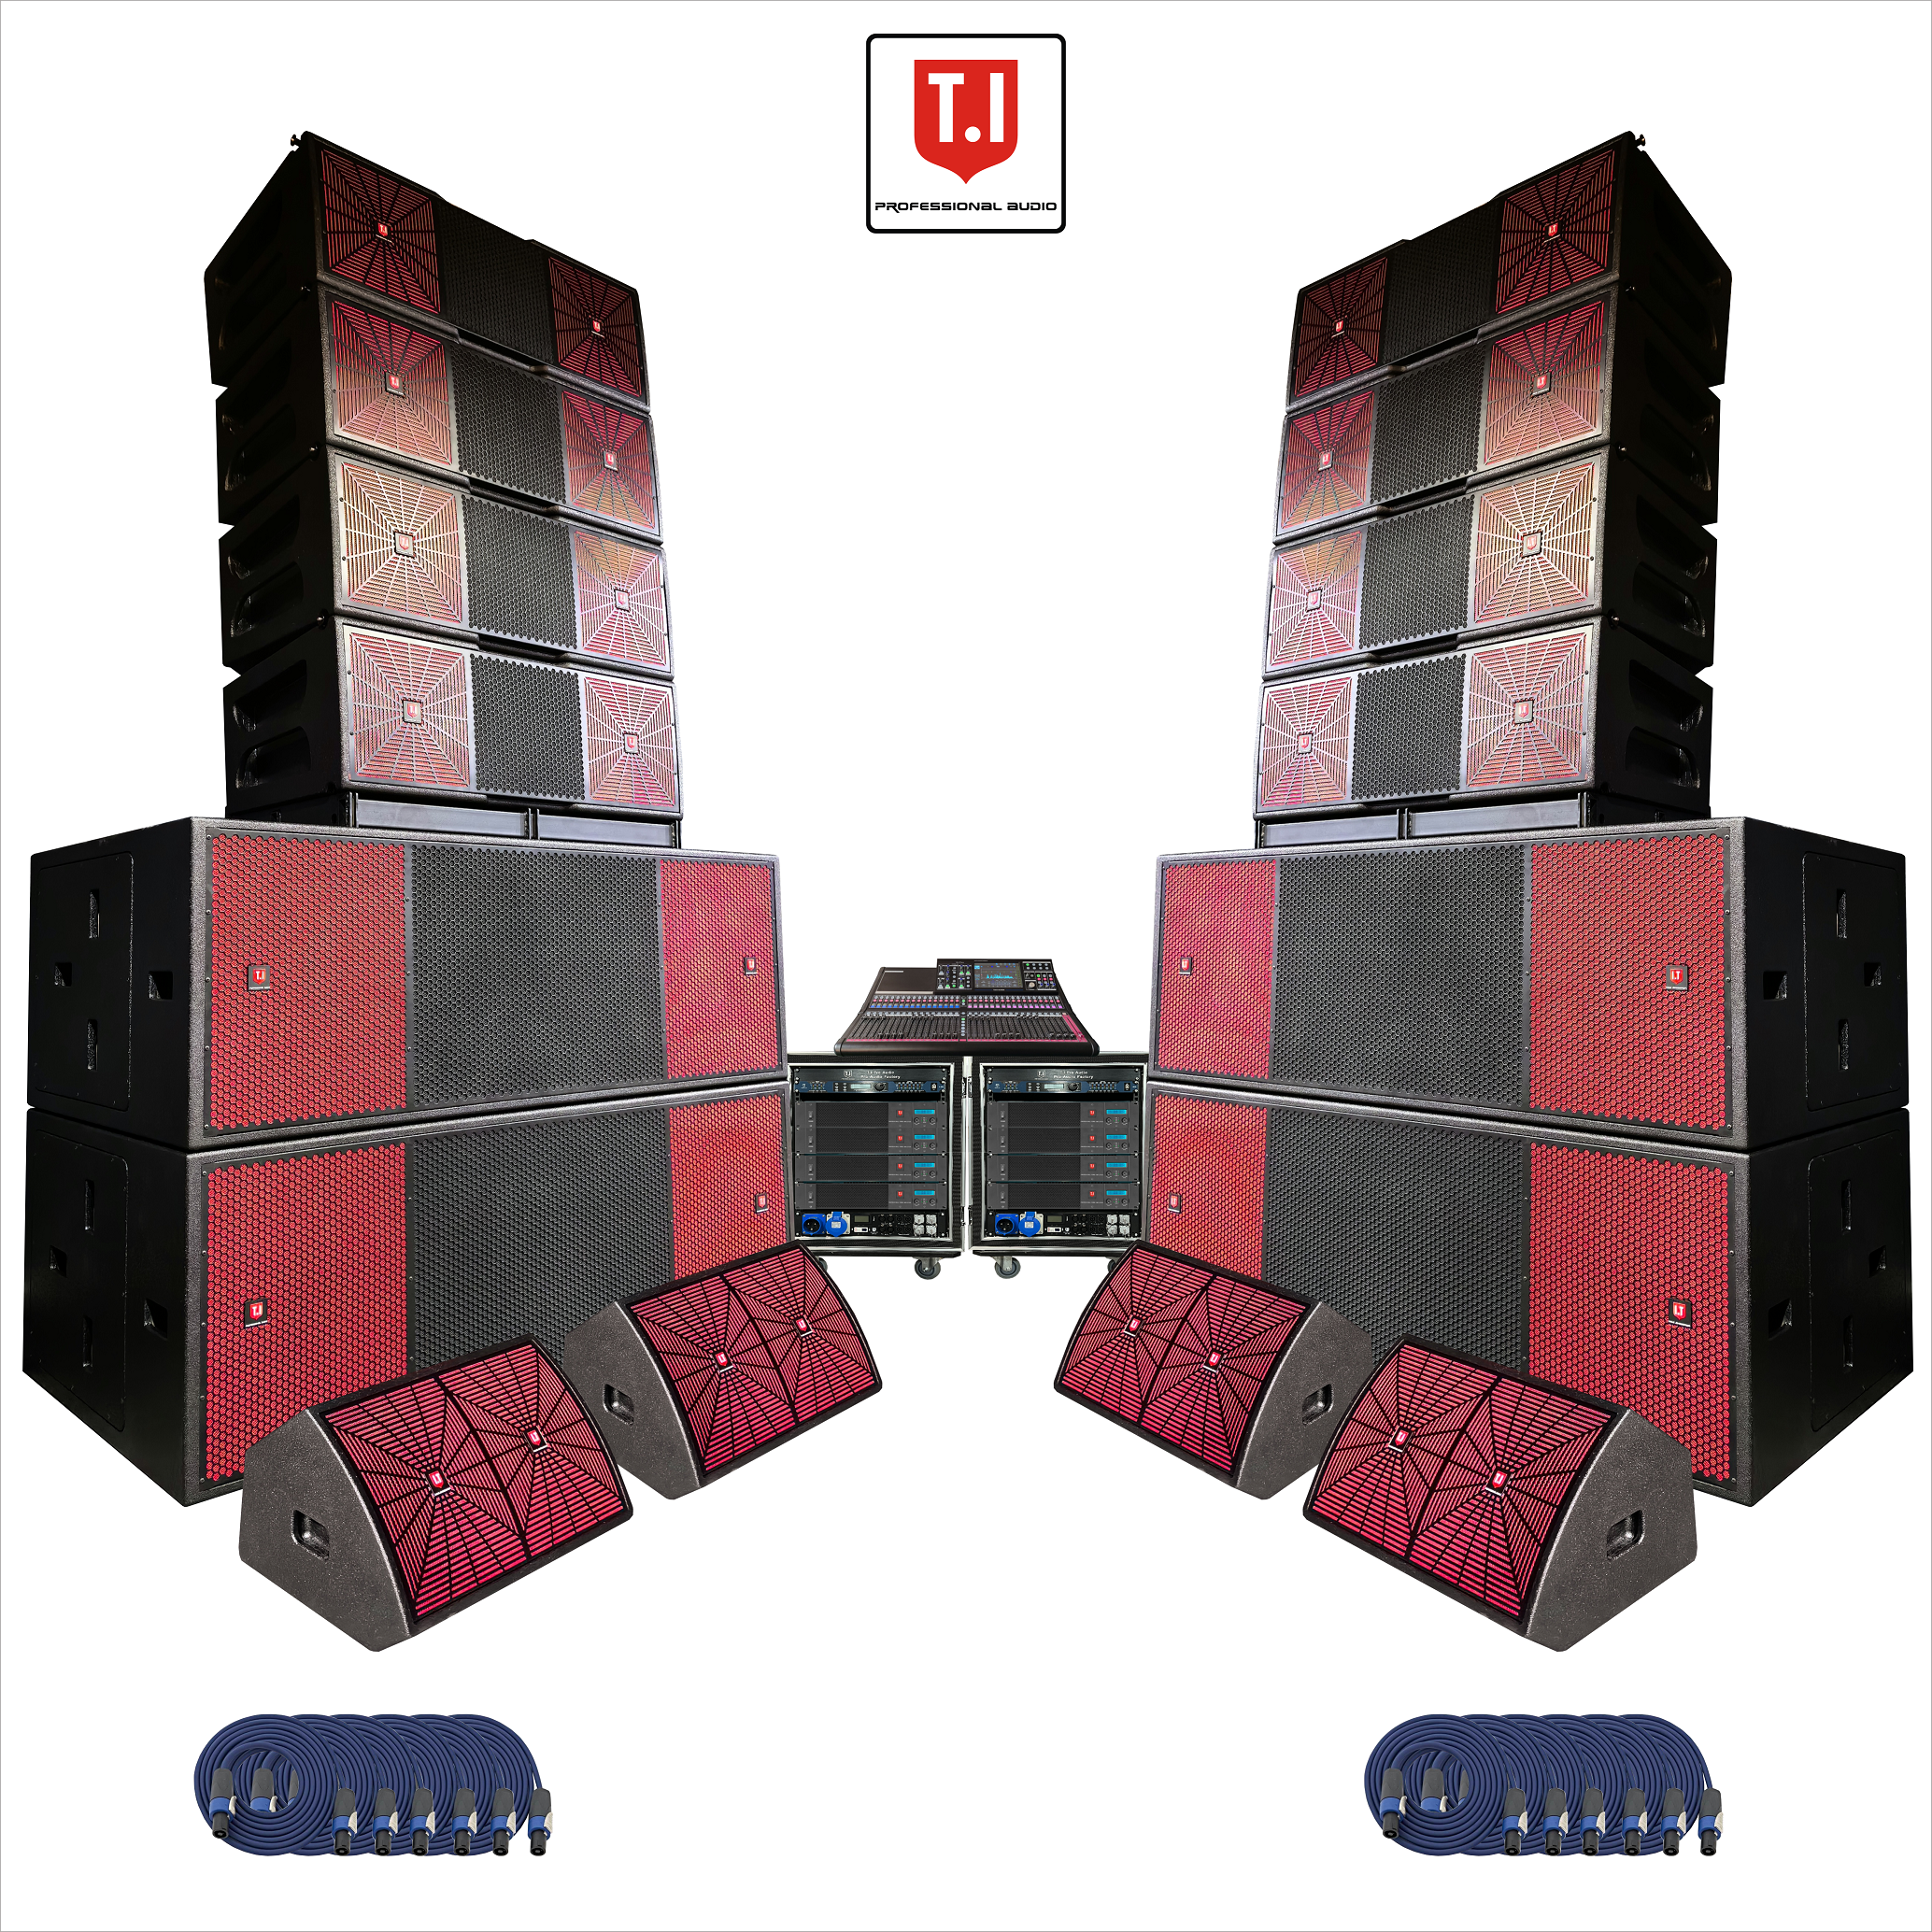 Pro 212 3 way double 12 inch line array sound system. 